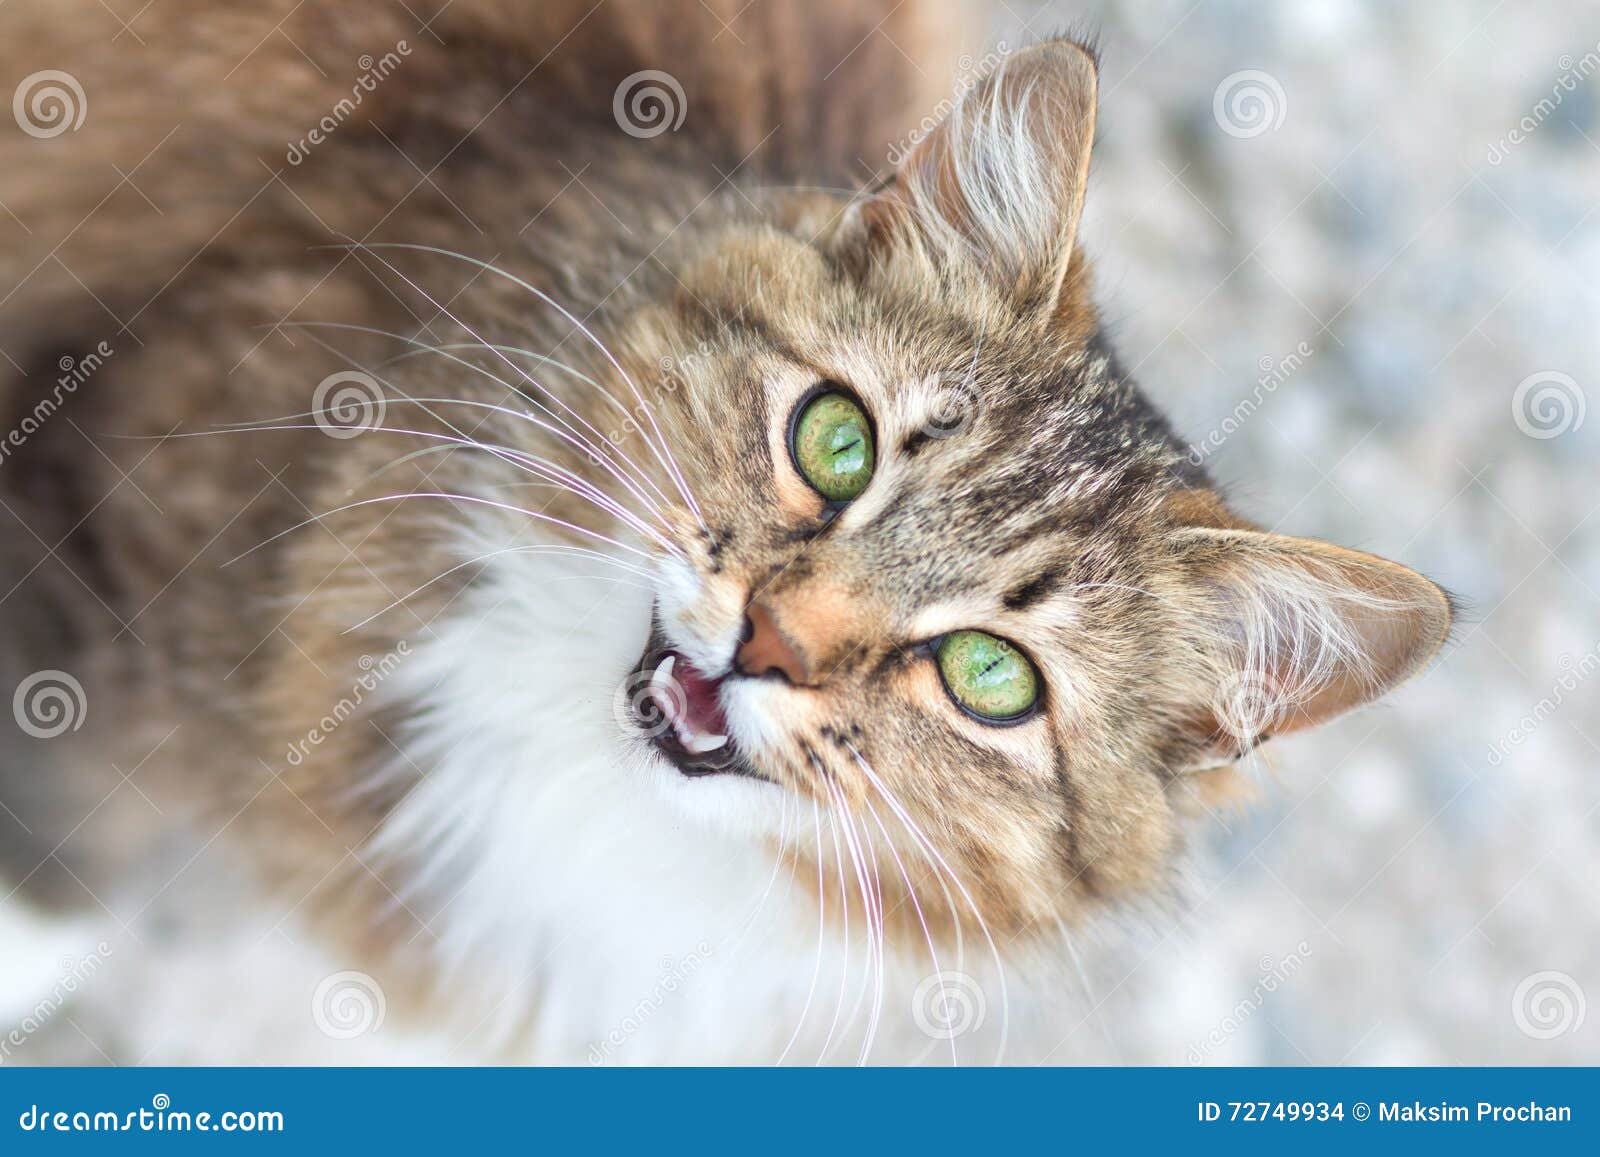 Portrait Of A Cat Meowing And Looking Up Stock Photo Image of